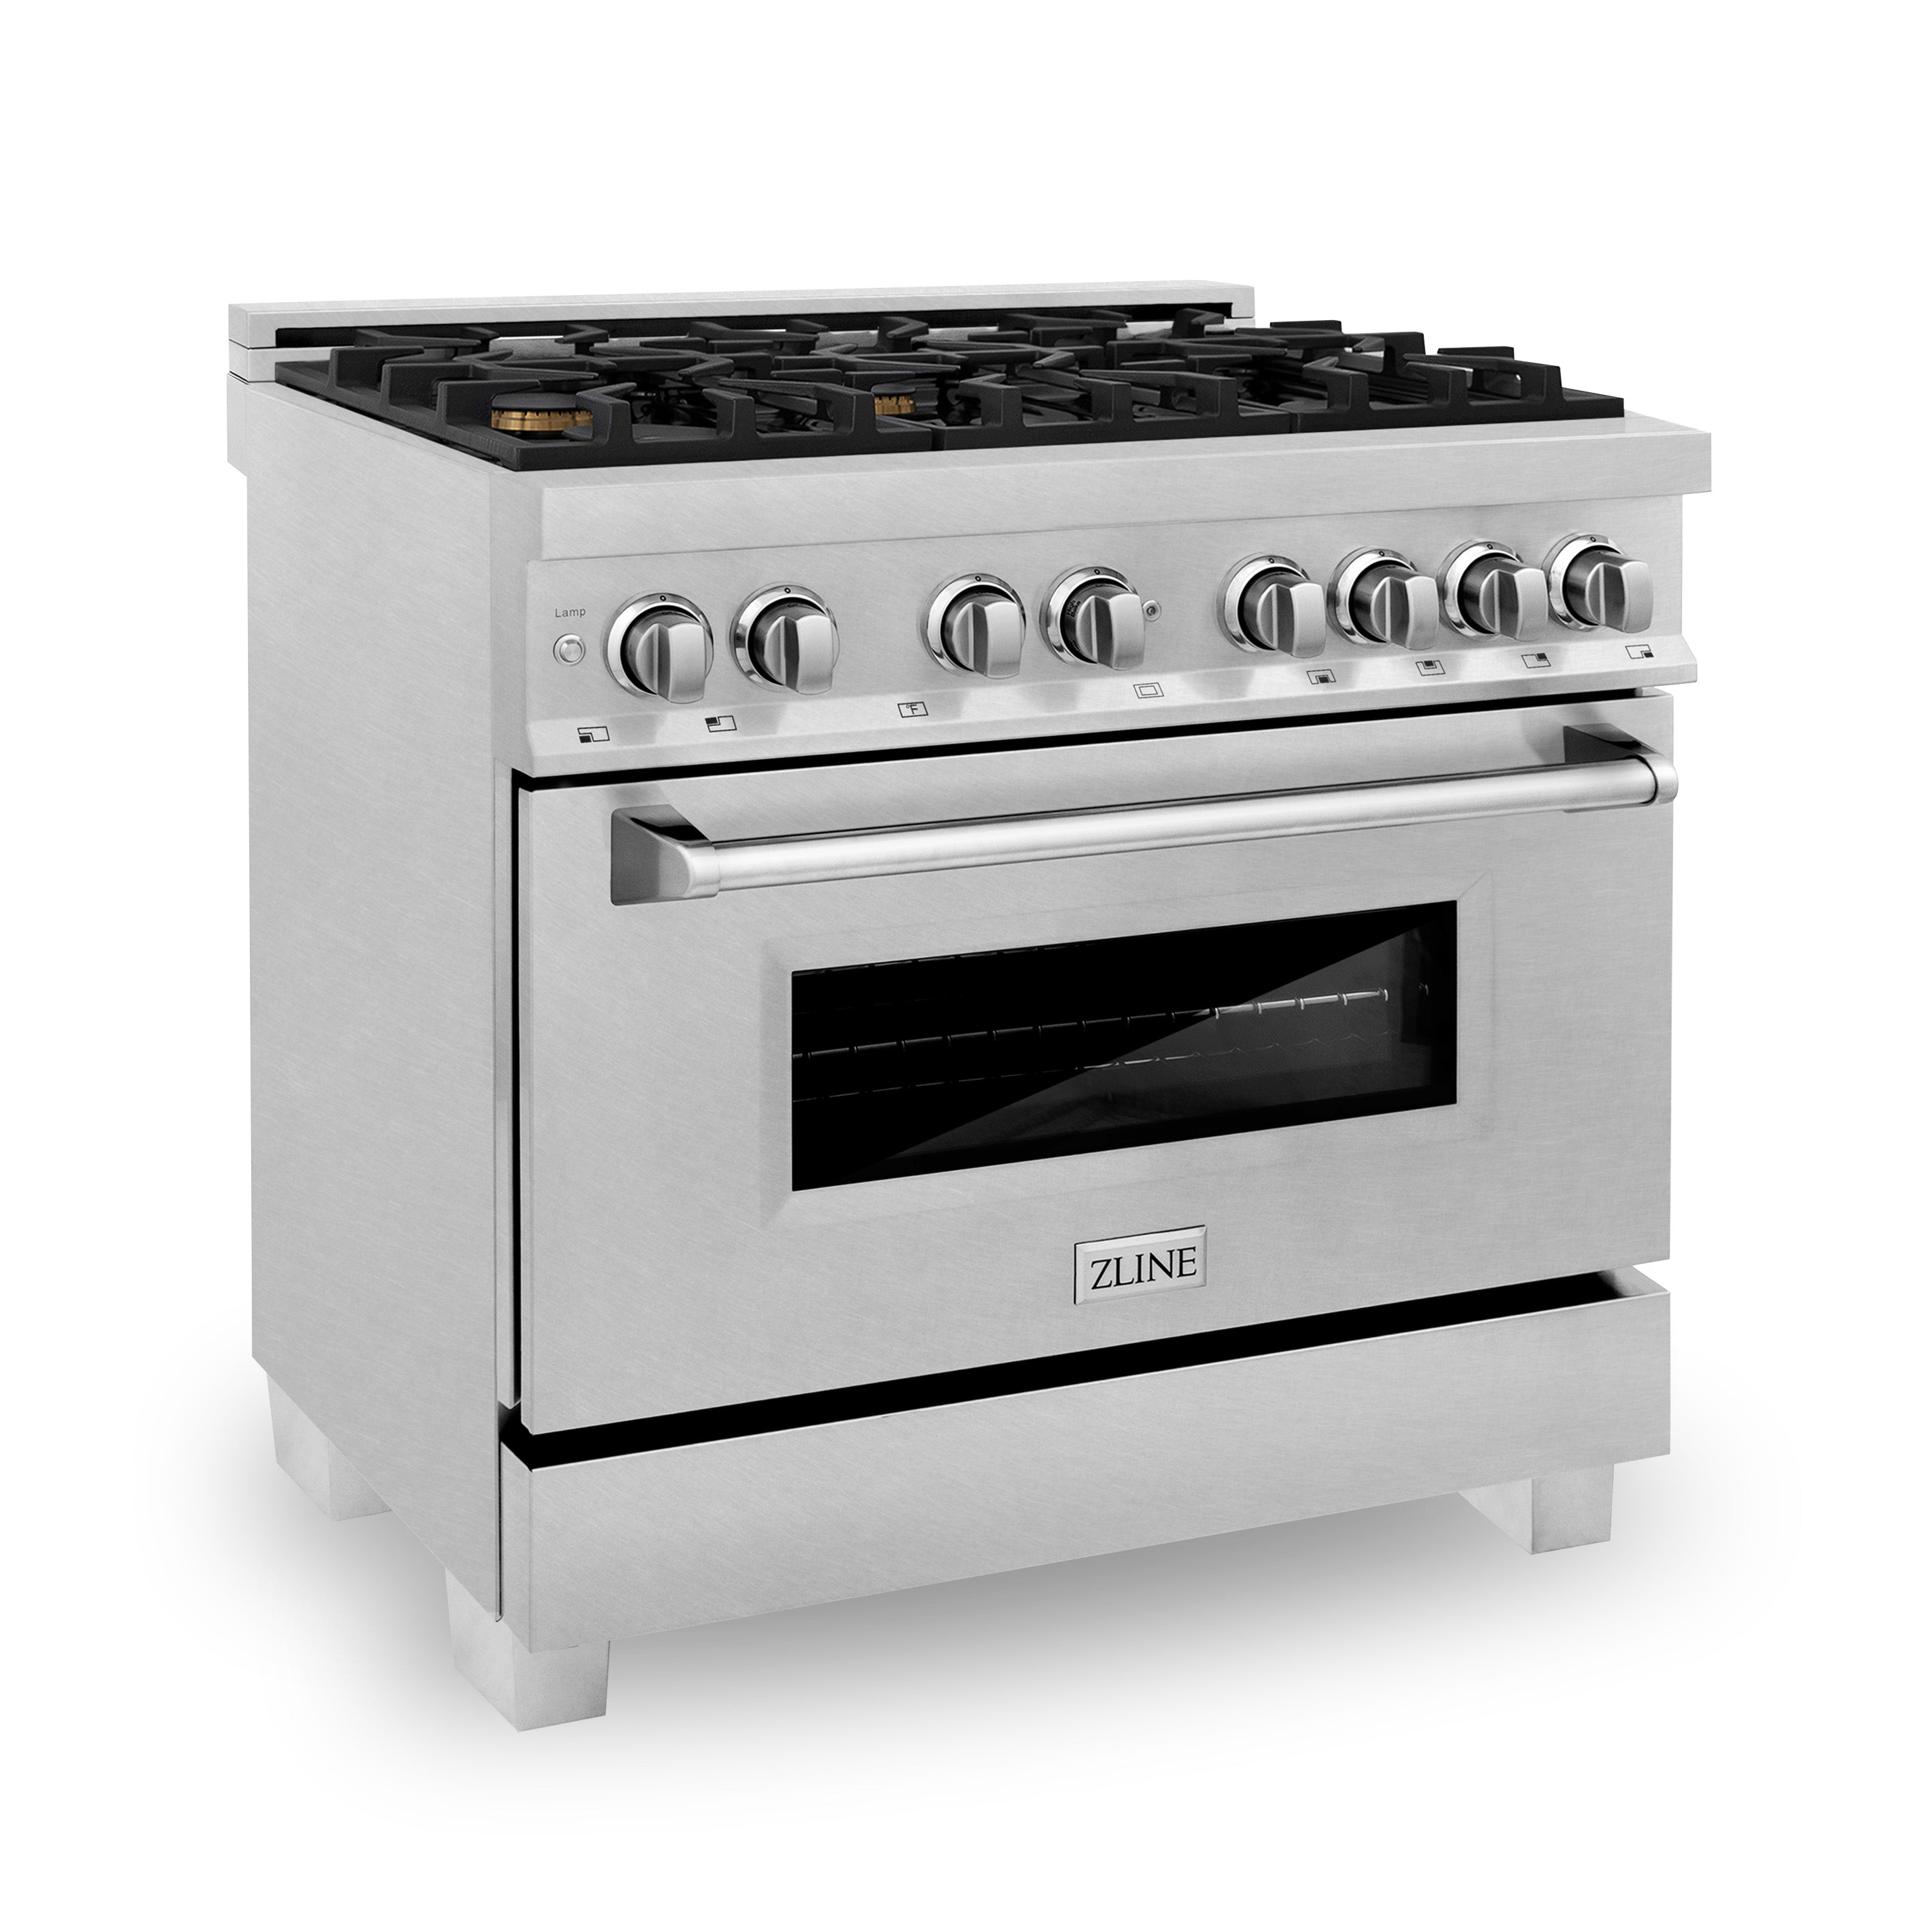 ZLINE 36" 4.6 cu. ft. Dual Fuel Range with Gas Stove and Electric Oven in Fingerprint Resistant Stainless Steel and Brass Burners (RAS-SN-BR-36)